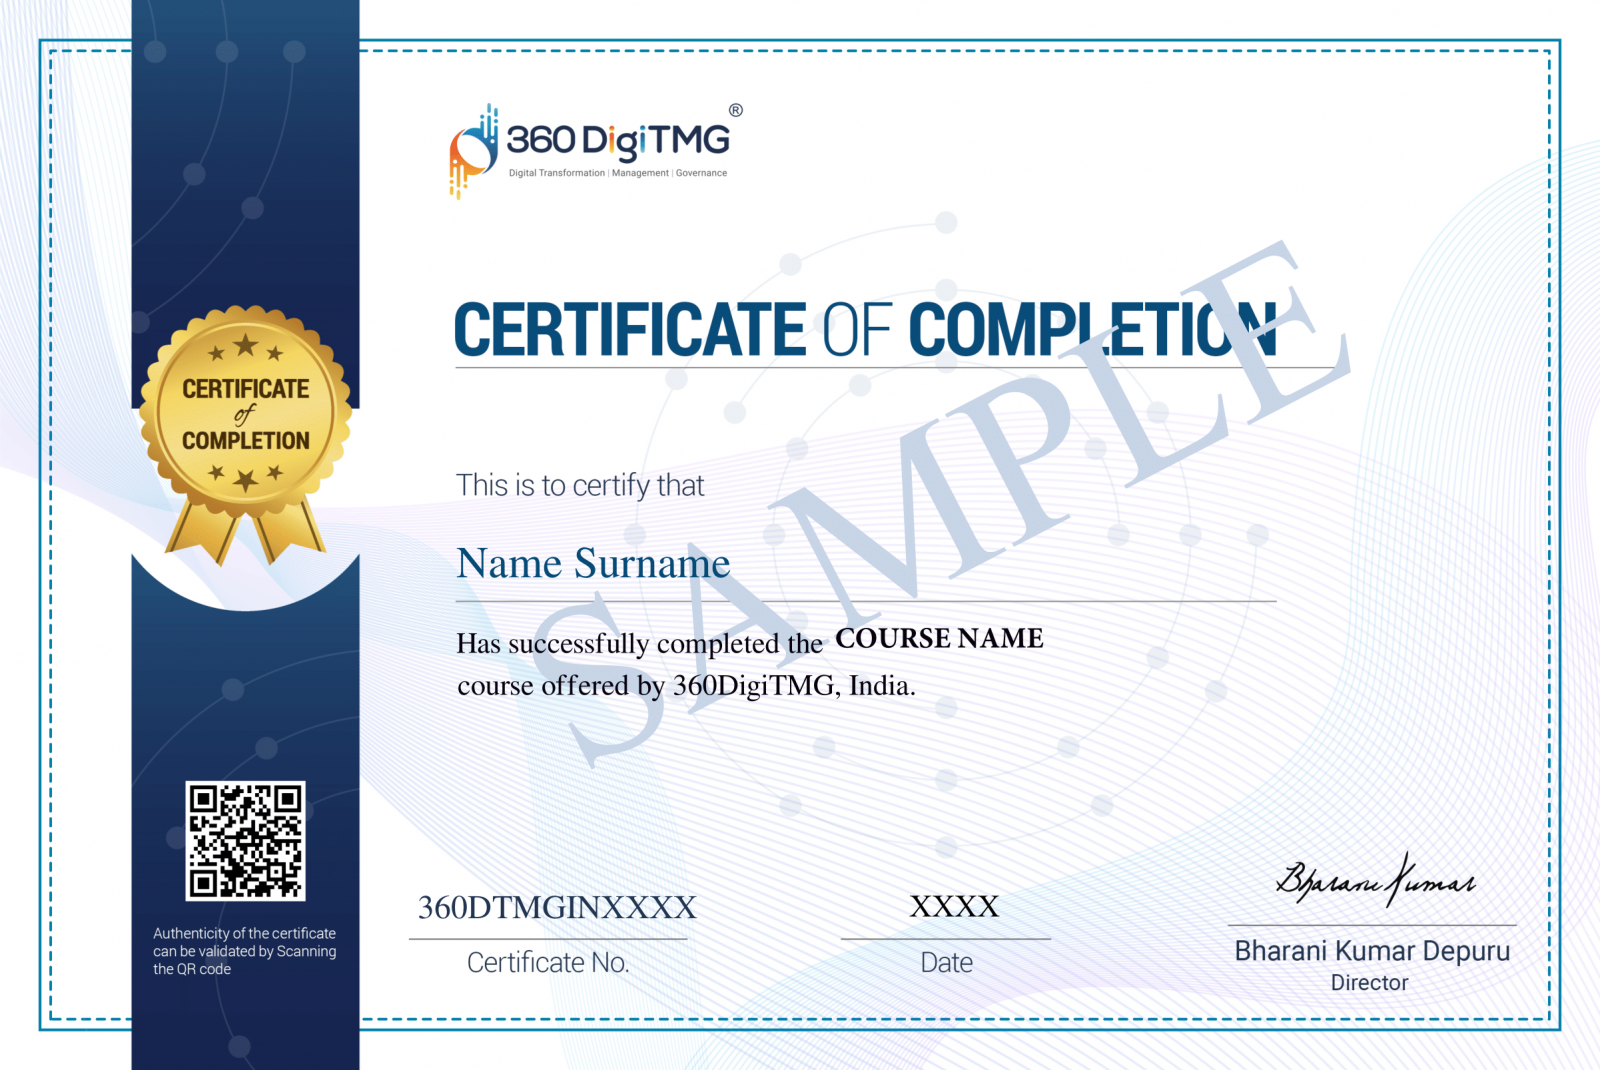 cyber security certification course - 360digitmg